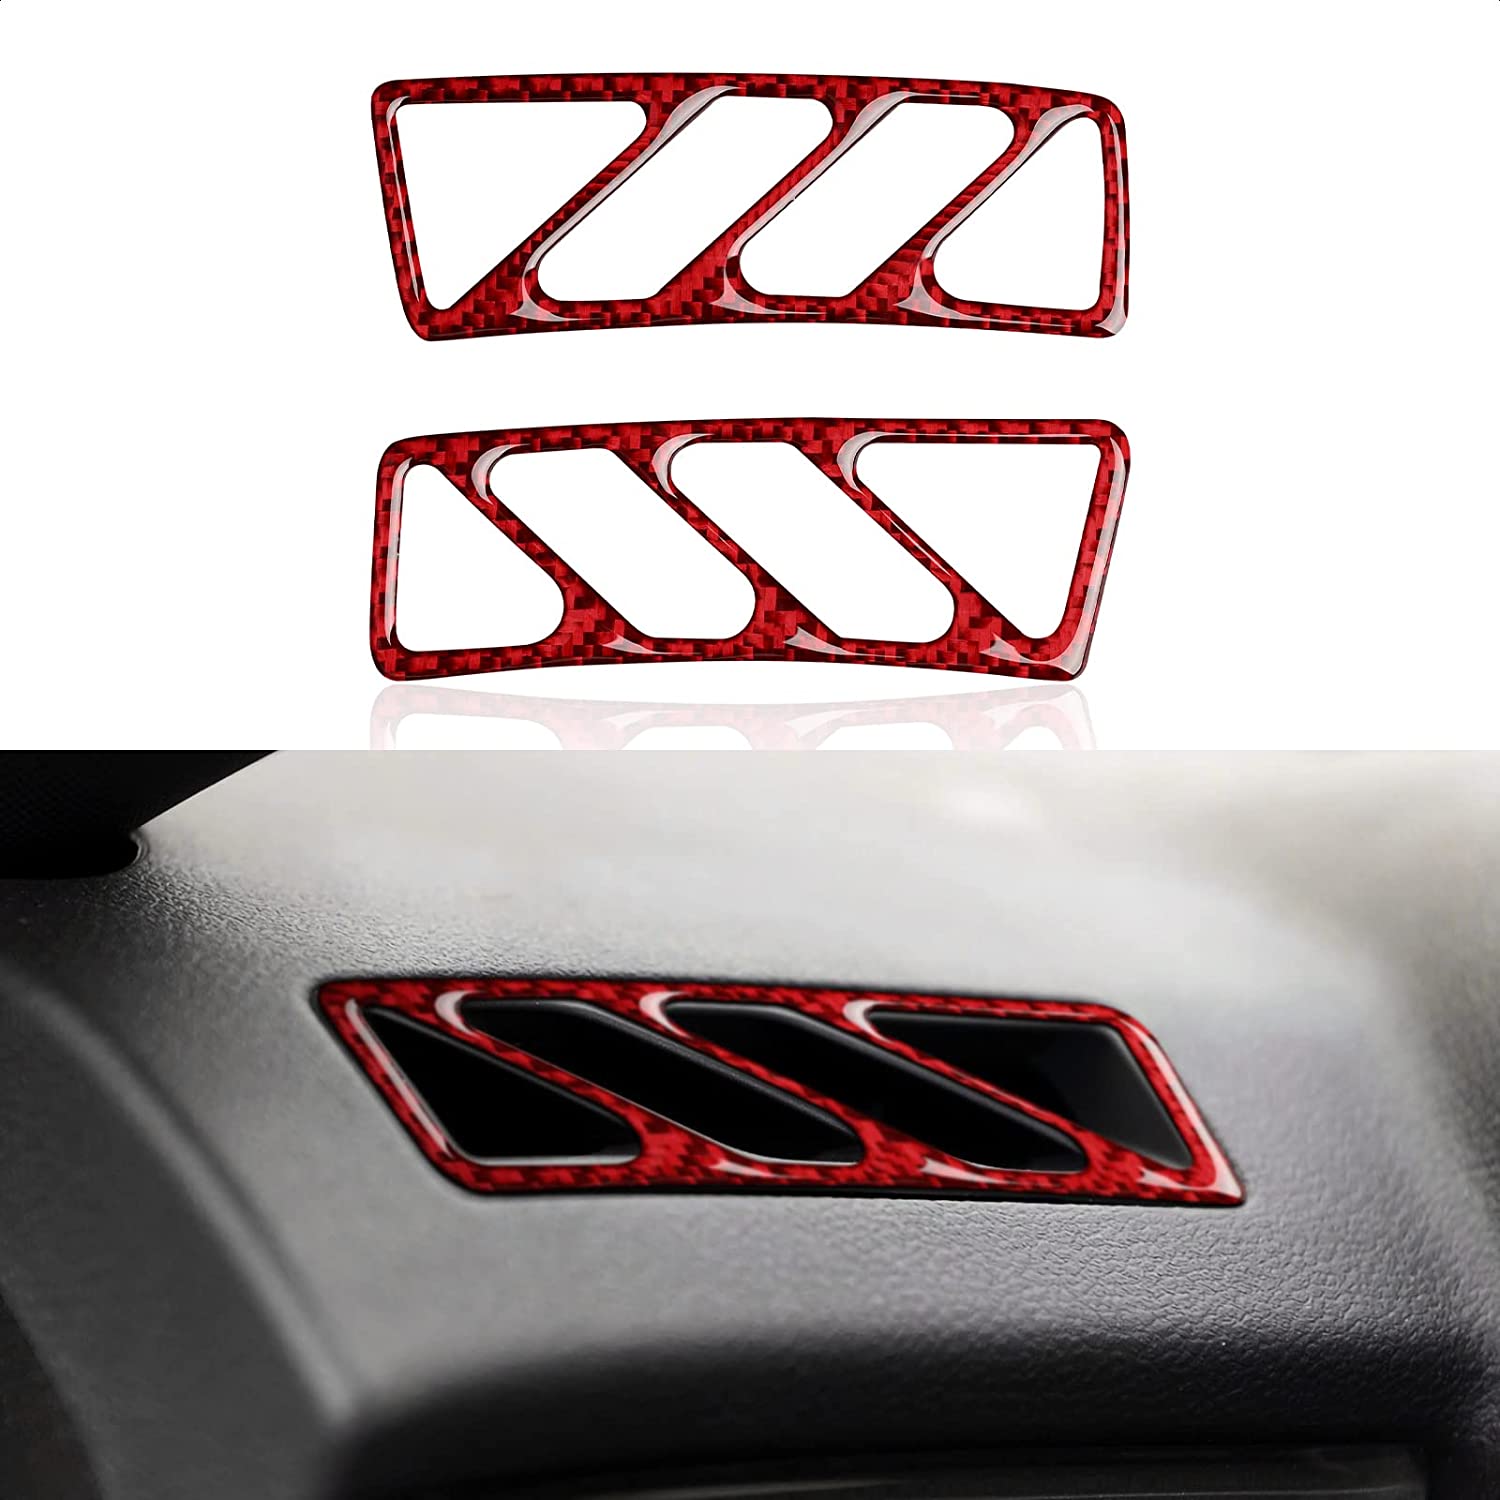 Carbon Fiber Car Air Outlet Sticker Decal Interior Trim Cover for Chevrolet Camaro 2010 2011 2012 2013 2014 2015 Accessories - Delicate Leather